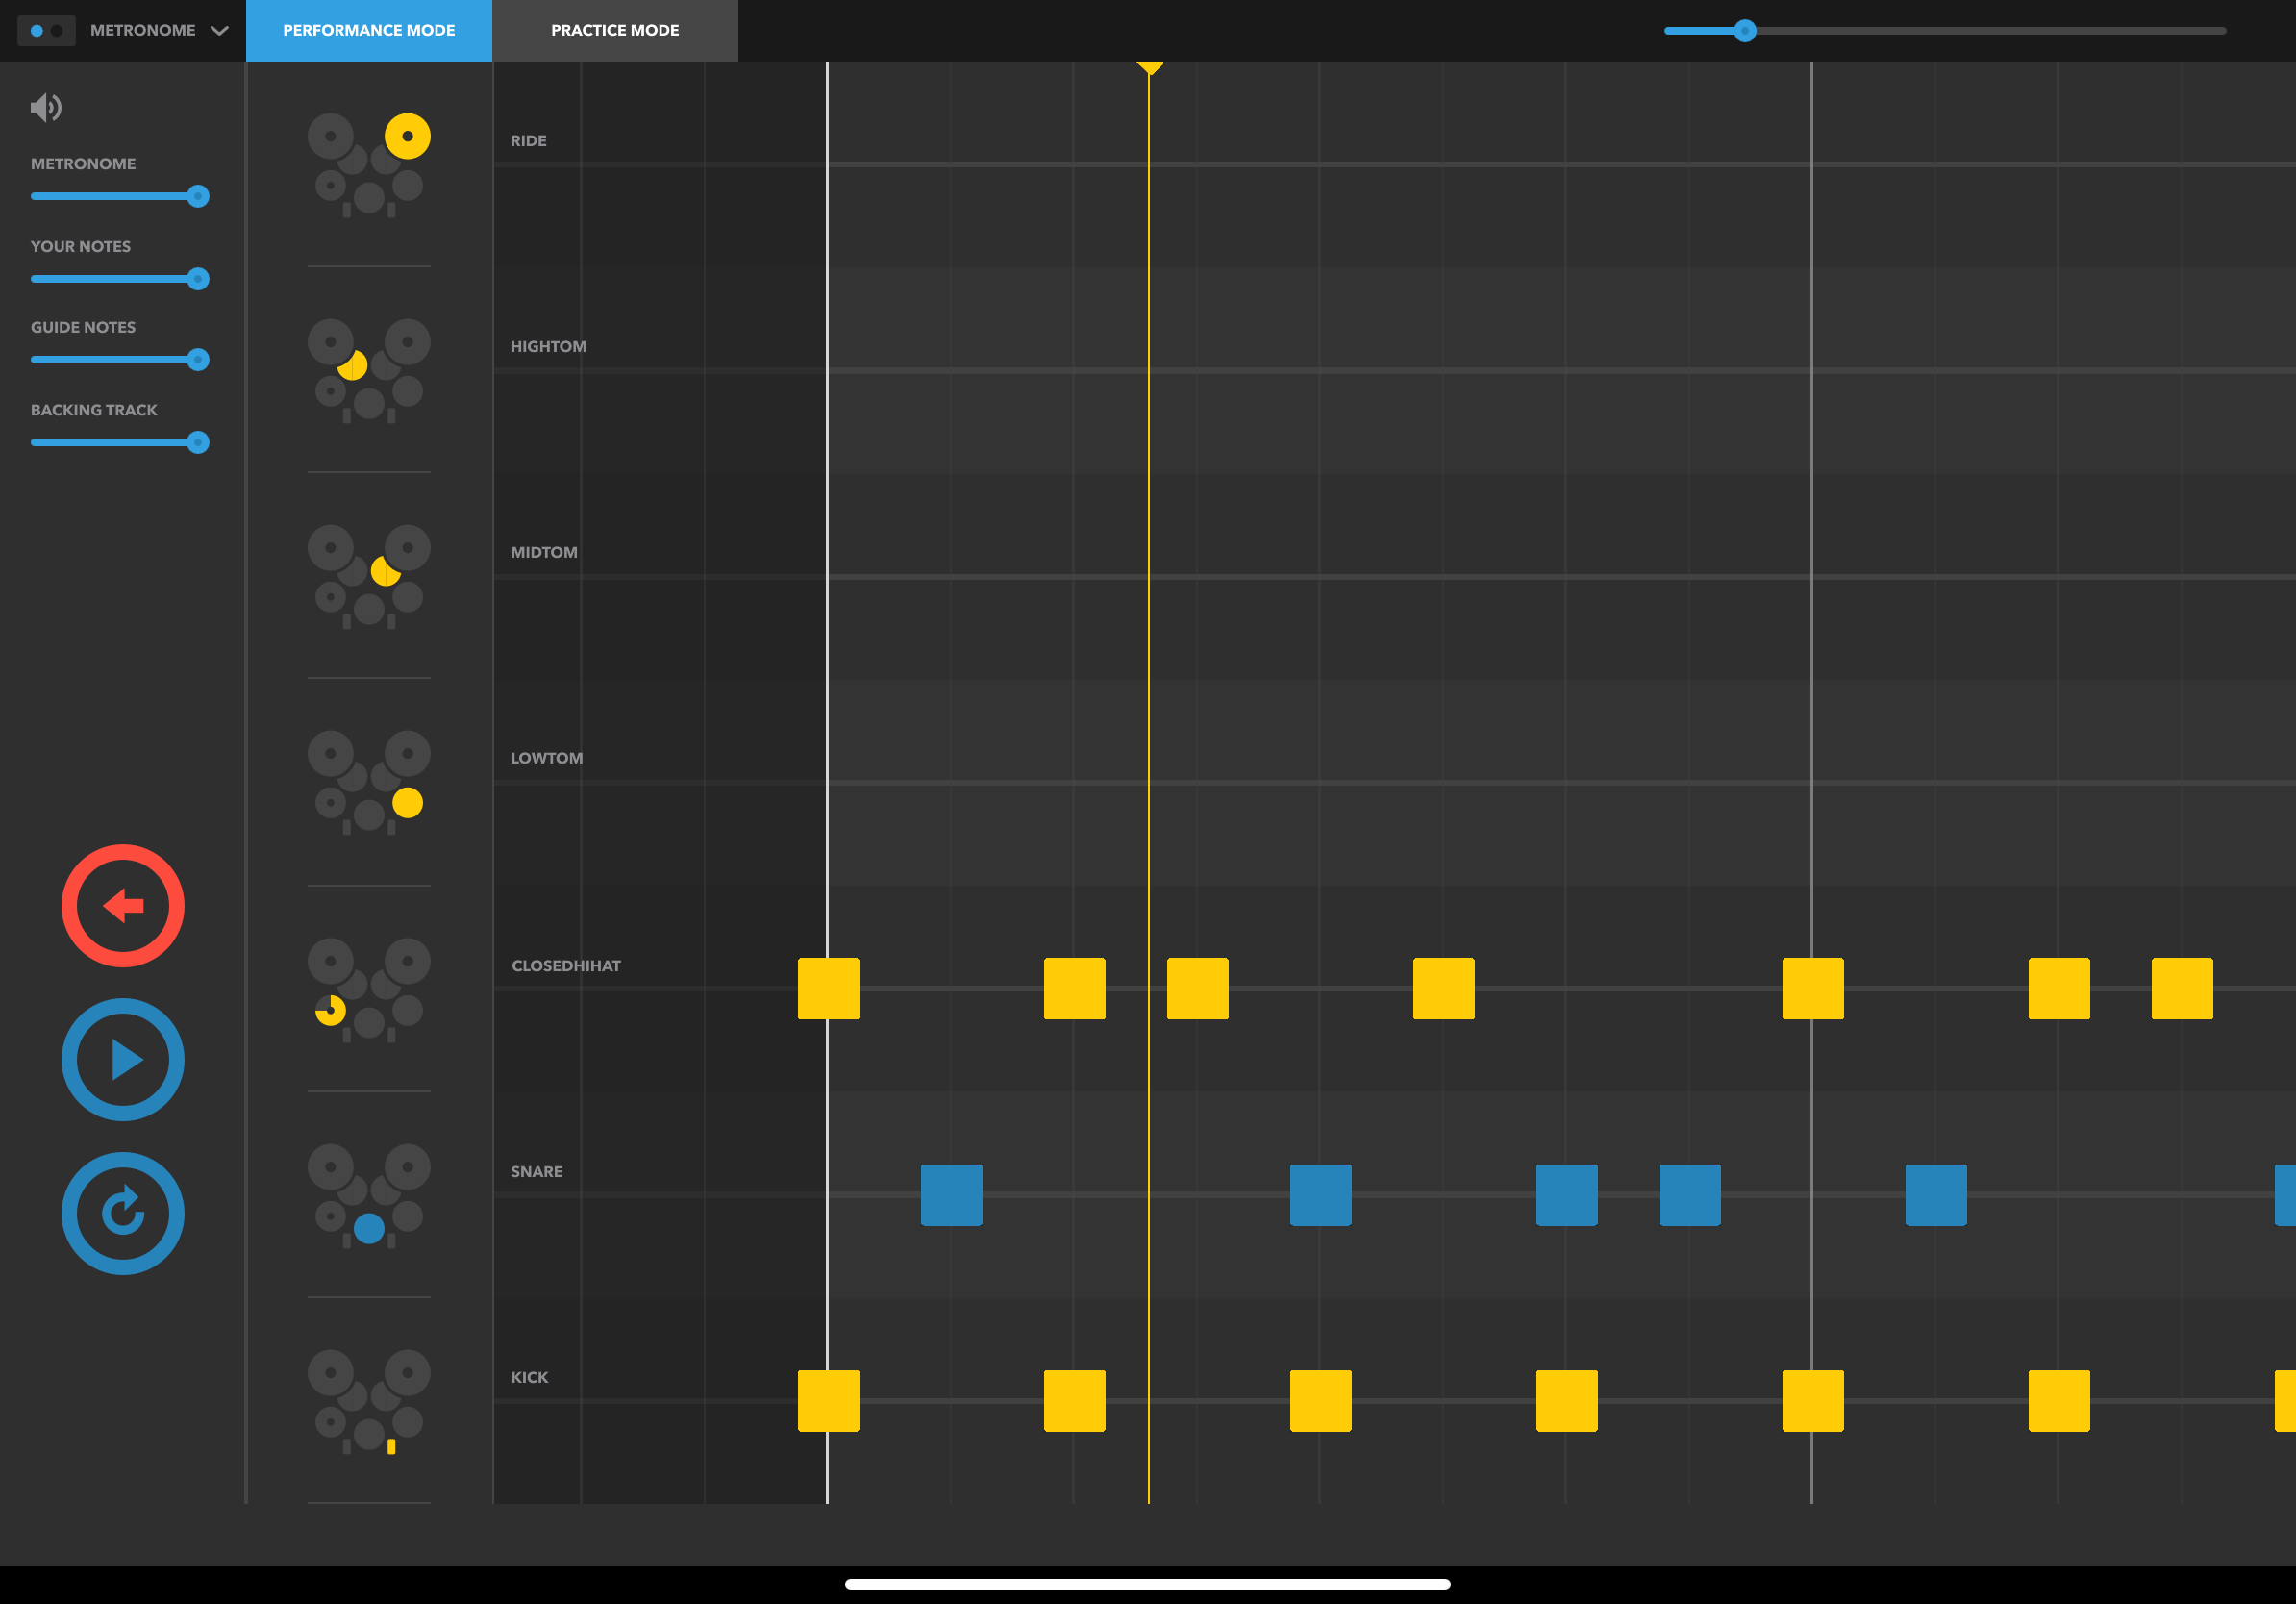 A screenshot of the iPad app "Melodics". It's showing a pattern of notes to hit on the drums, right/left/right/right/left/right/left/left on the hi-hat and snare, so you end up doing in groups of three, but for the kick drum it's on every second note.